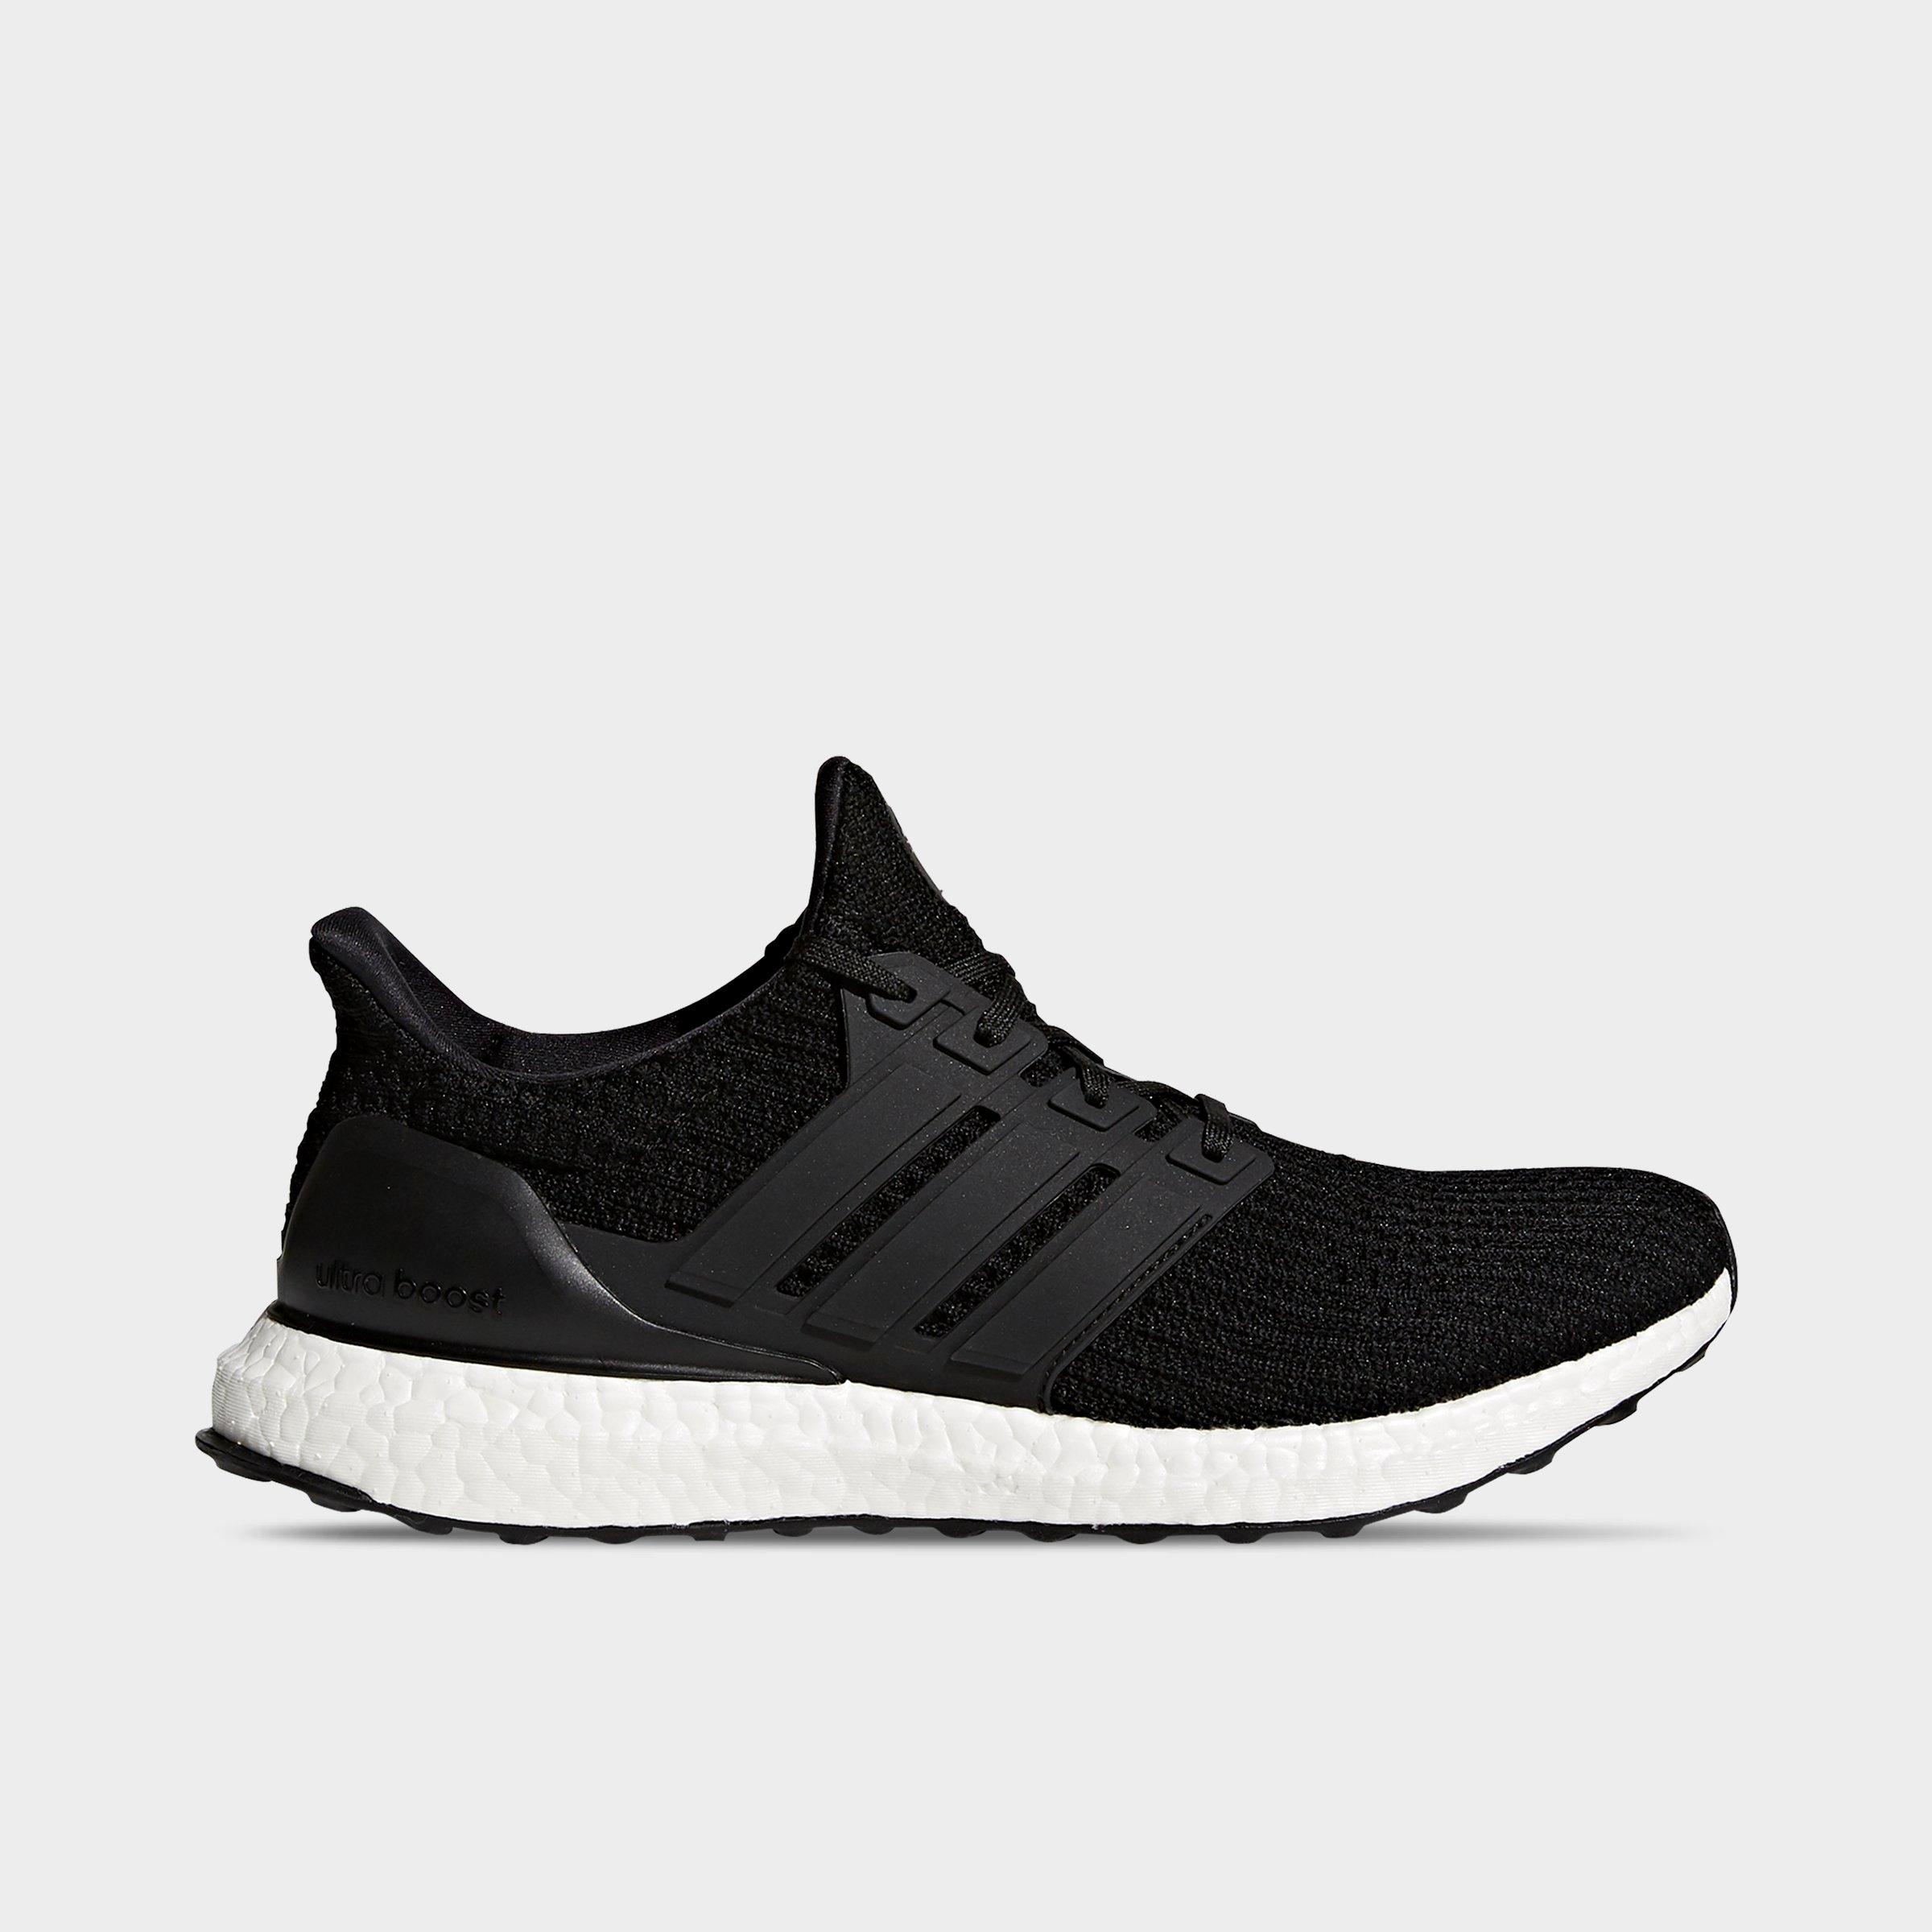 adidas white and black running shoes